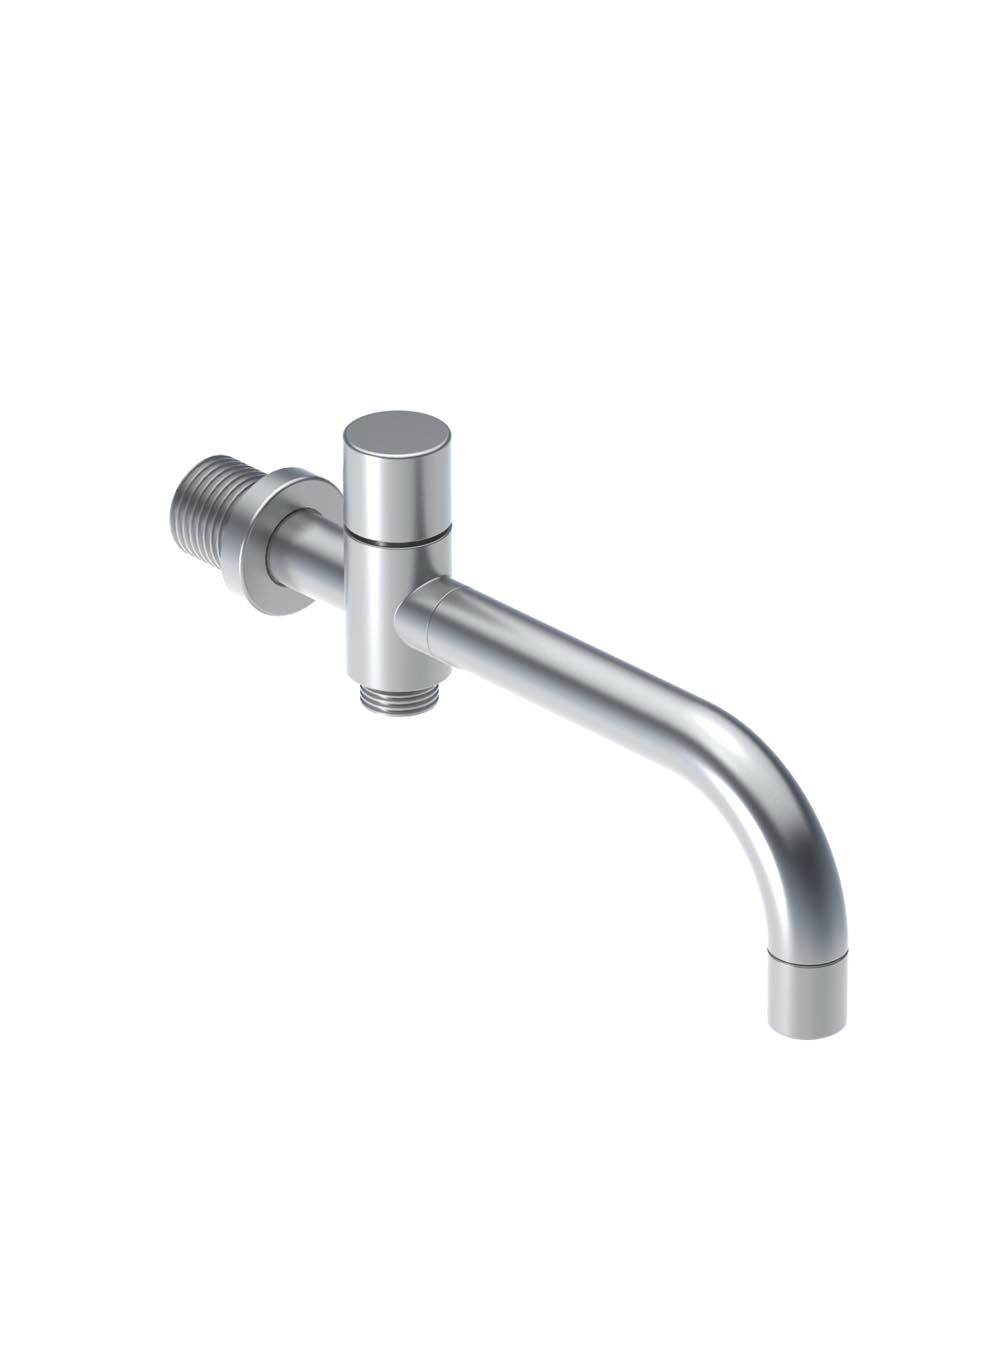 040: 185 mm bath spout with diverter for hand shower.
Incl. hand shower T2.